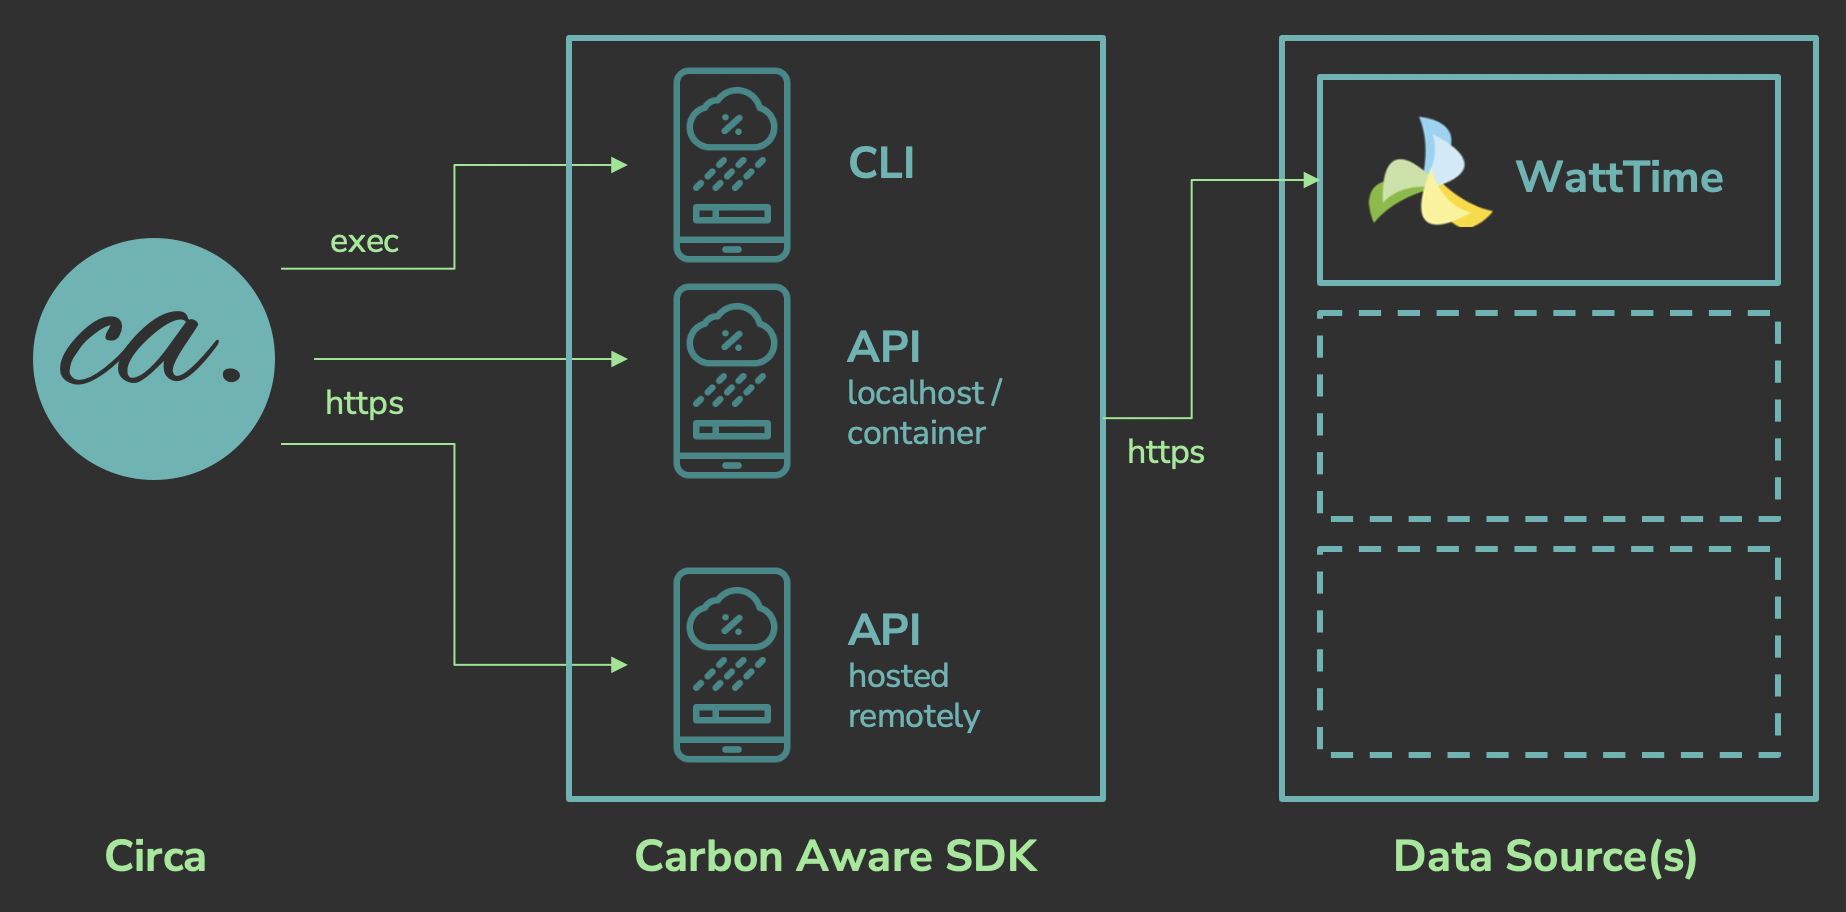 Diagram showing how Circa relates to the Carbon Aware SDK and WattTime data source.